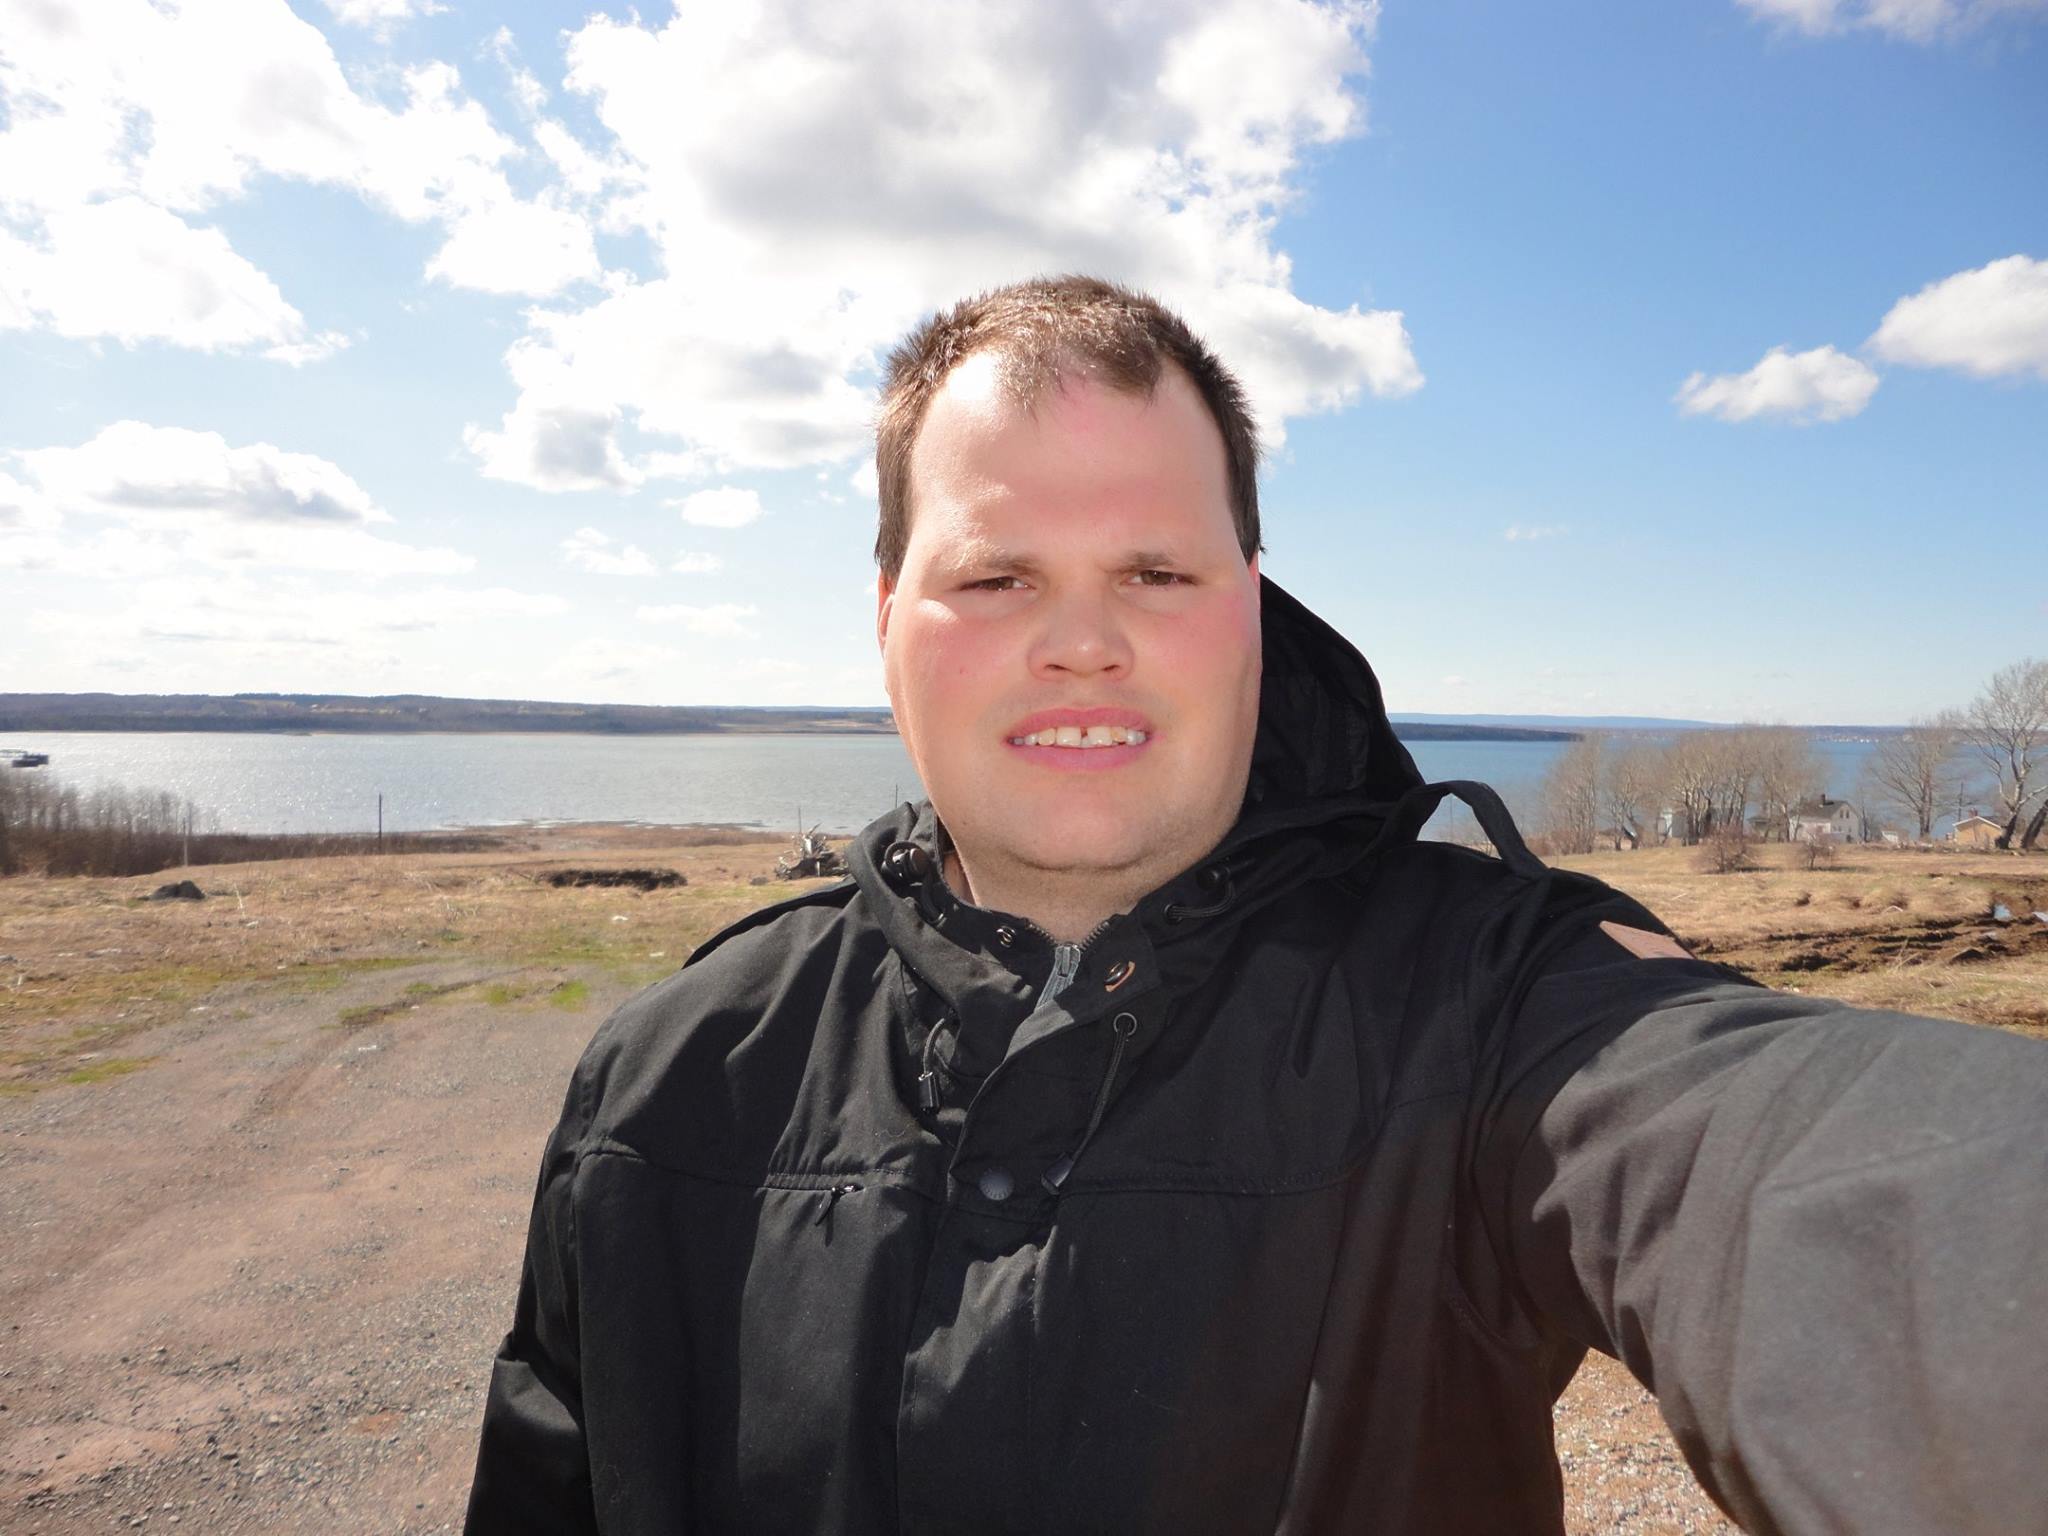 Frankie MacDonald is enjoying his warm weather down in Sydney Nova Scotia and it is sunny and beautiful outside and Frankie Does a Great Job Making Videos and Taking Pictures and i am doing a great job all the time.